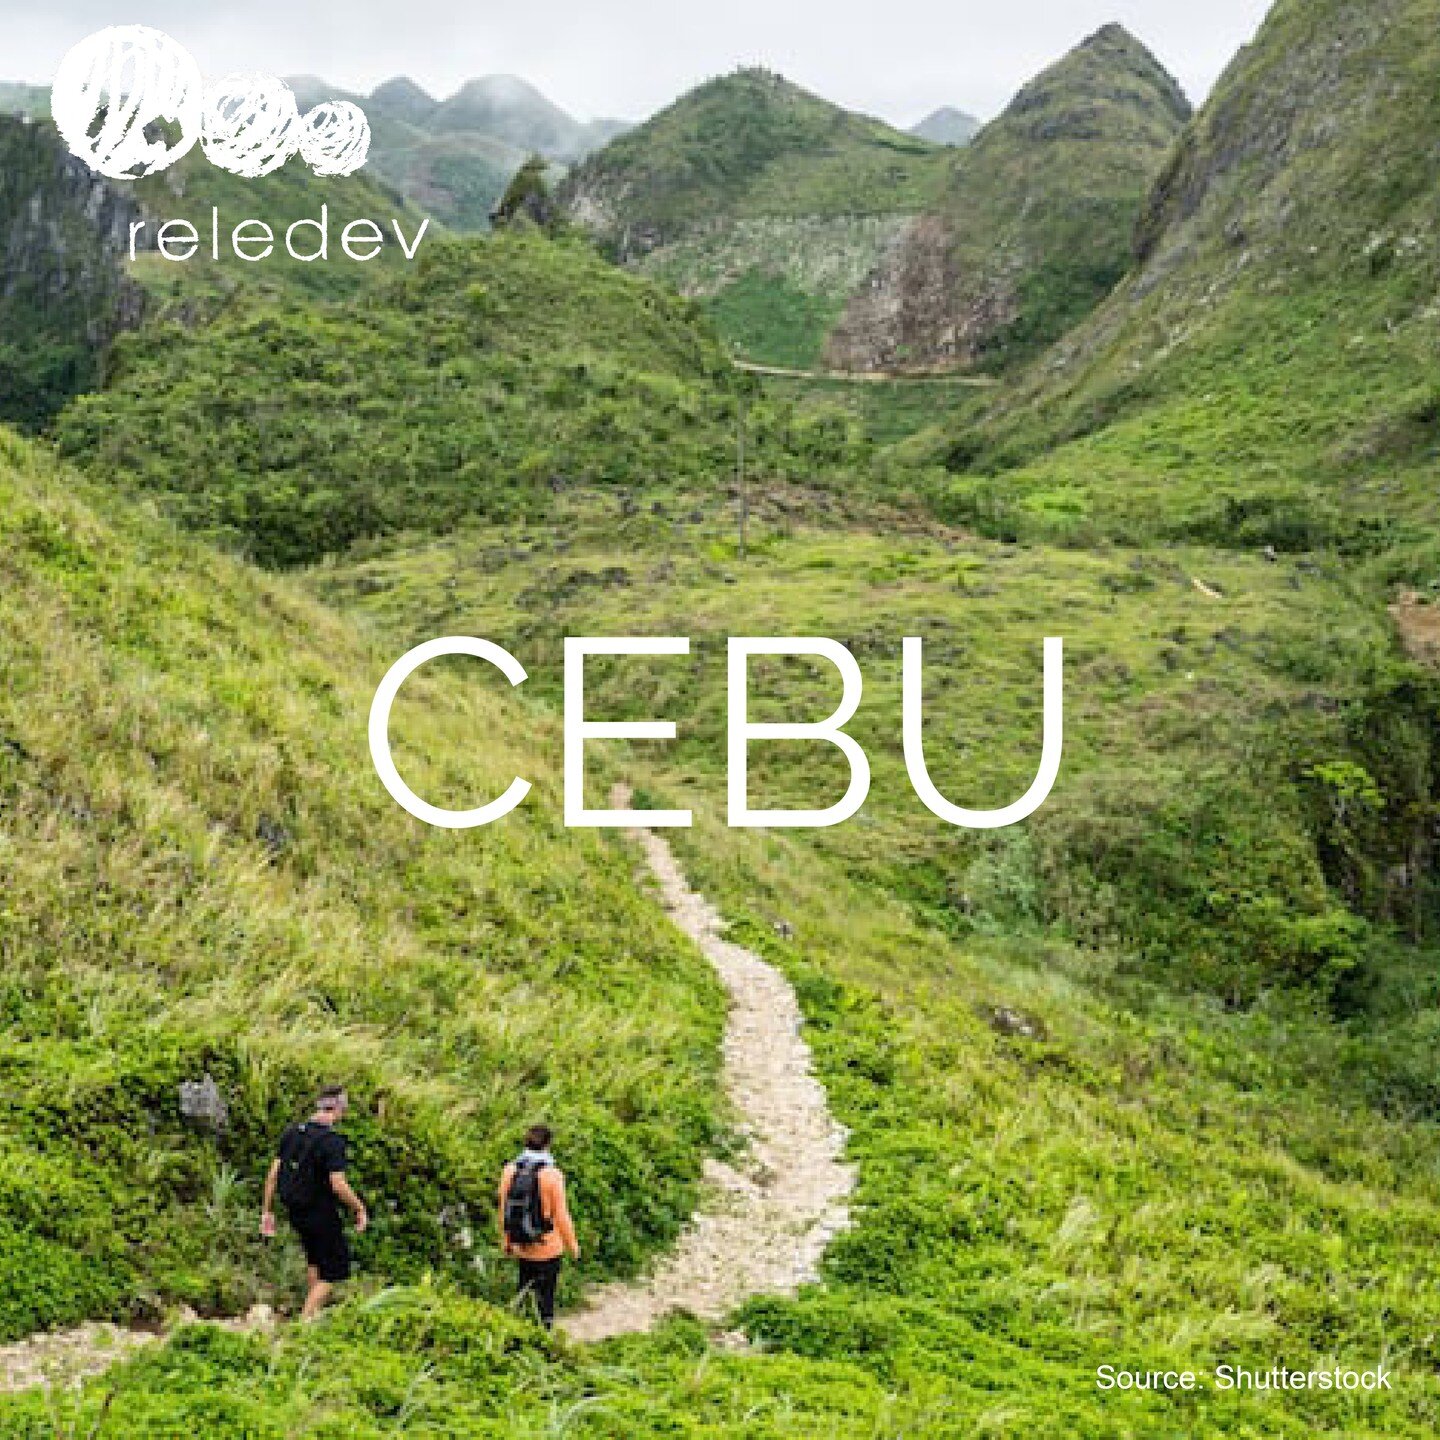 Loving the photos and videos we are receiving in real-time from the group of Australian and New Zealand volunteers who are currently overseas in Cebu, a province in the Philippines.
 
Some fun facts about Cebu:

1. Cebu City compromises more than 150